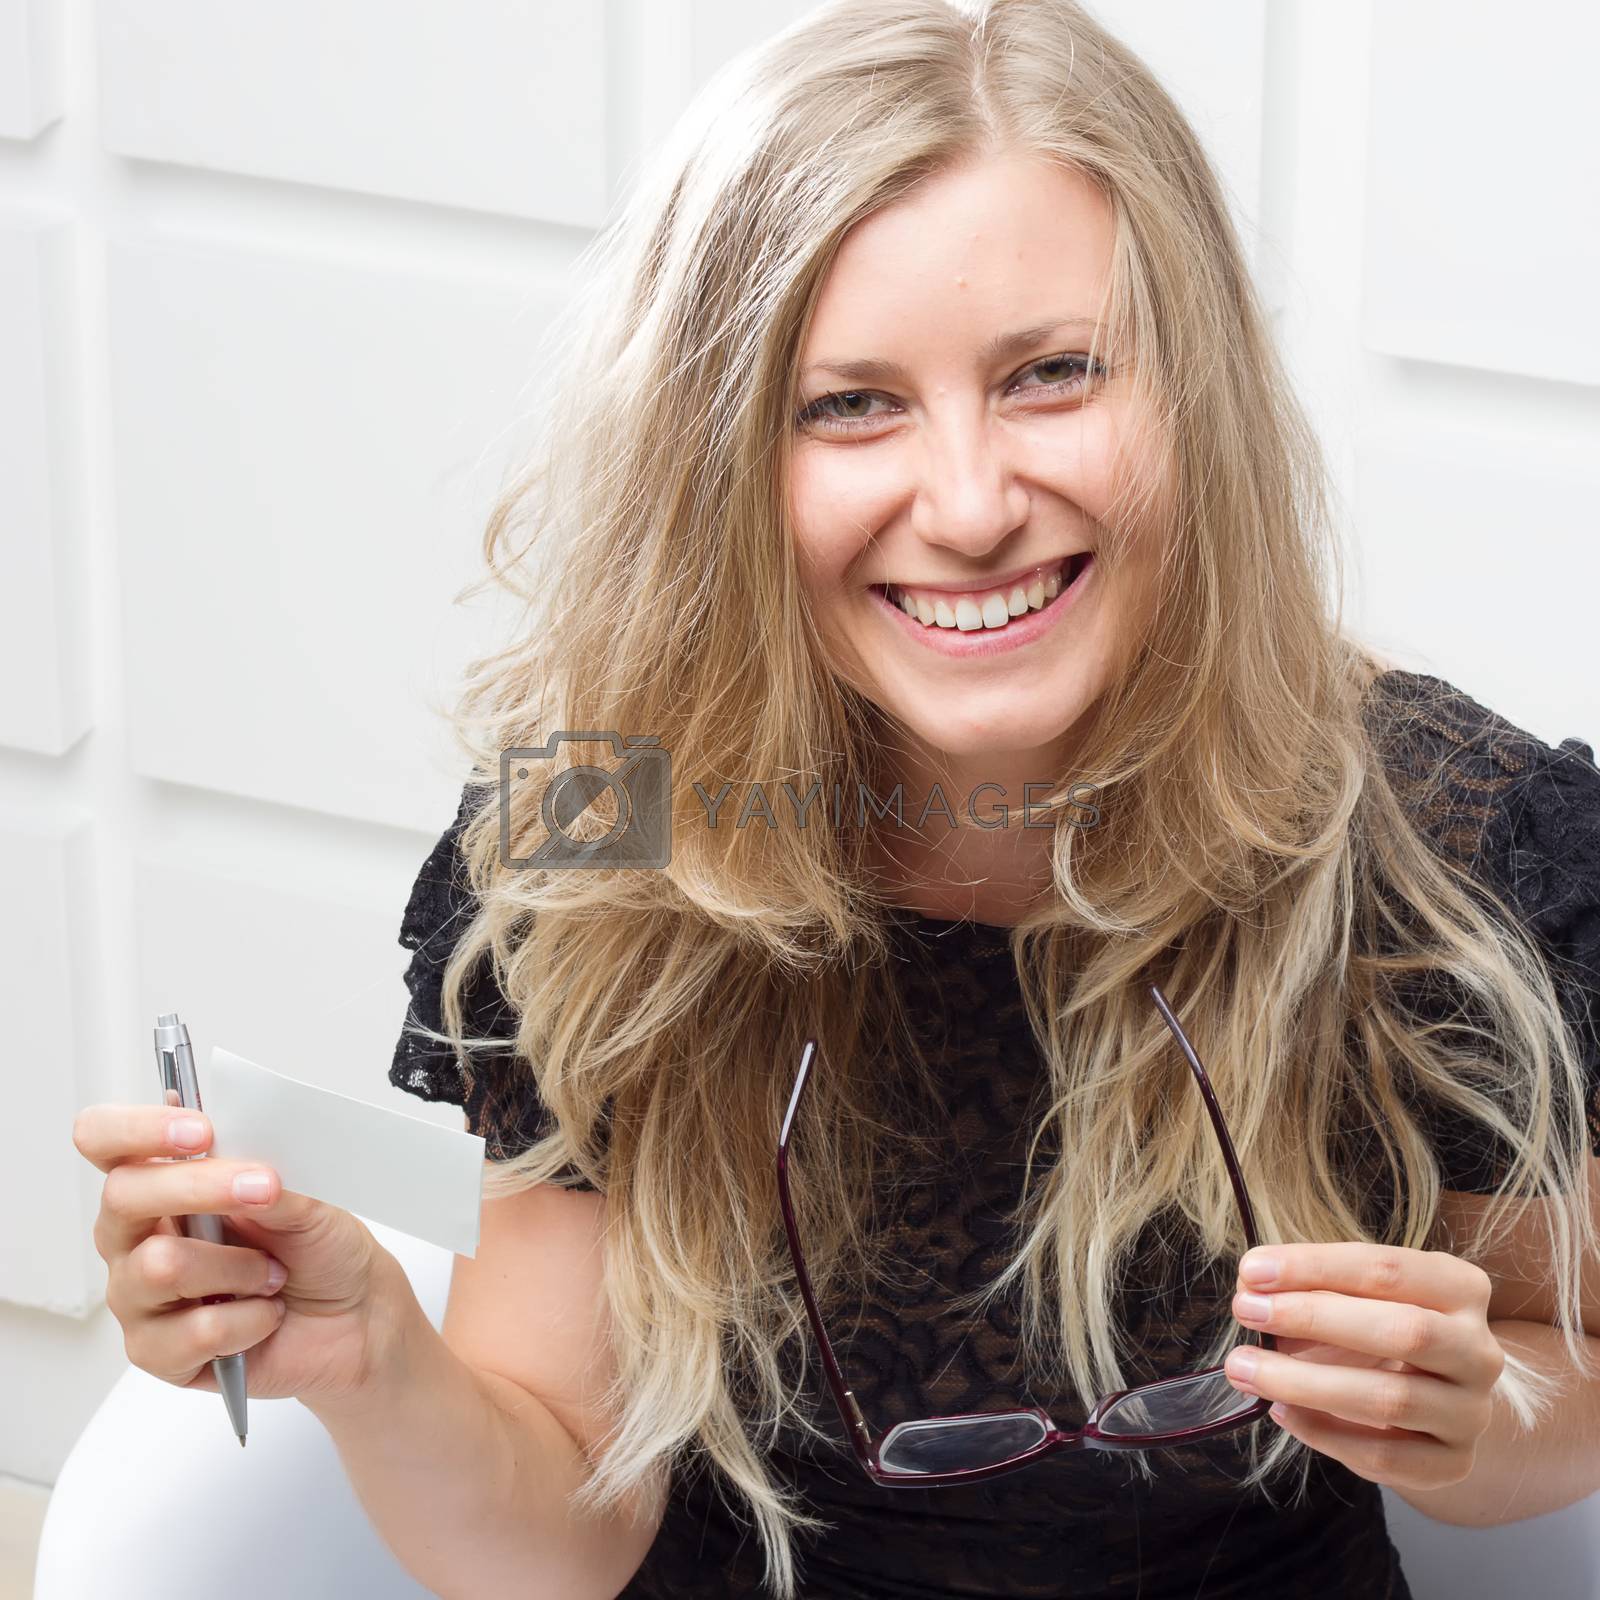 Royalty free image of Smiling woman with a pen by victosha